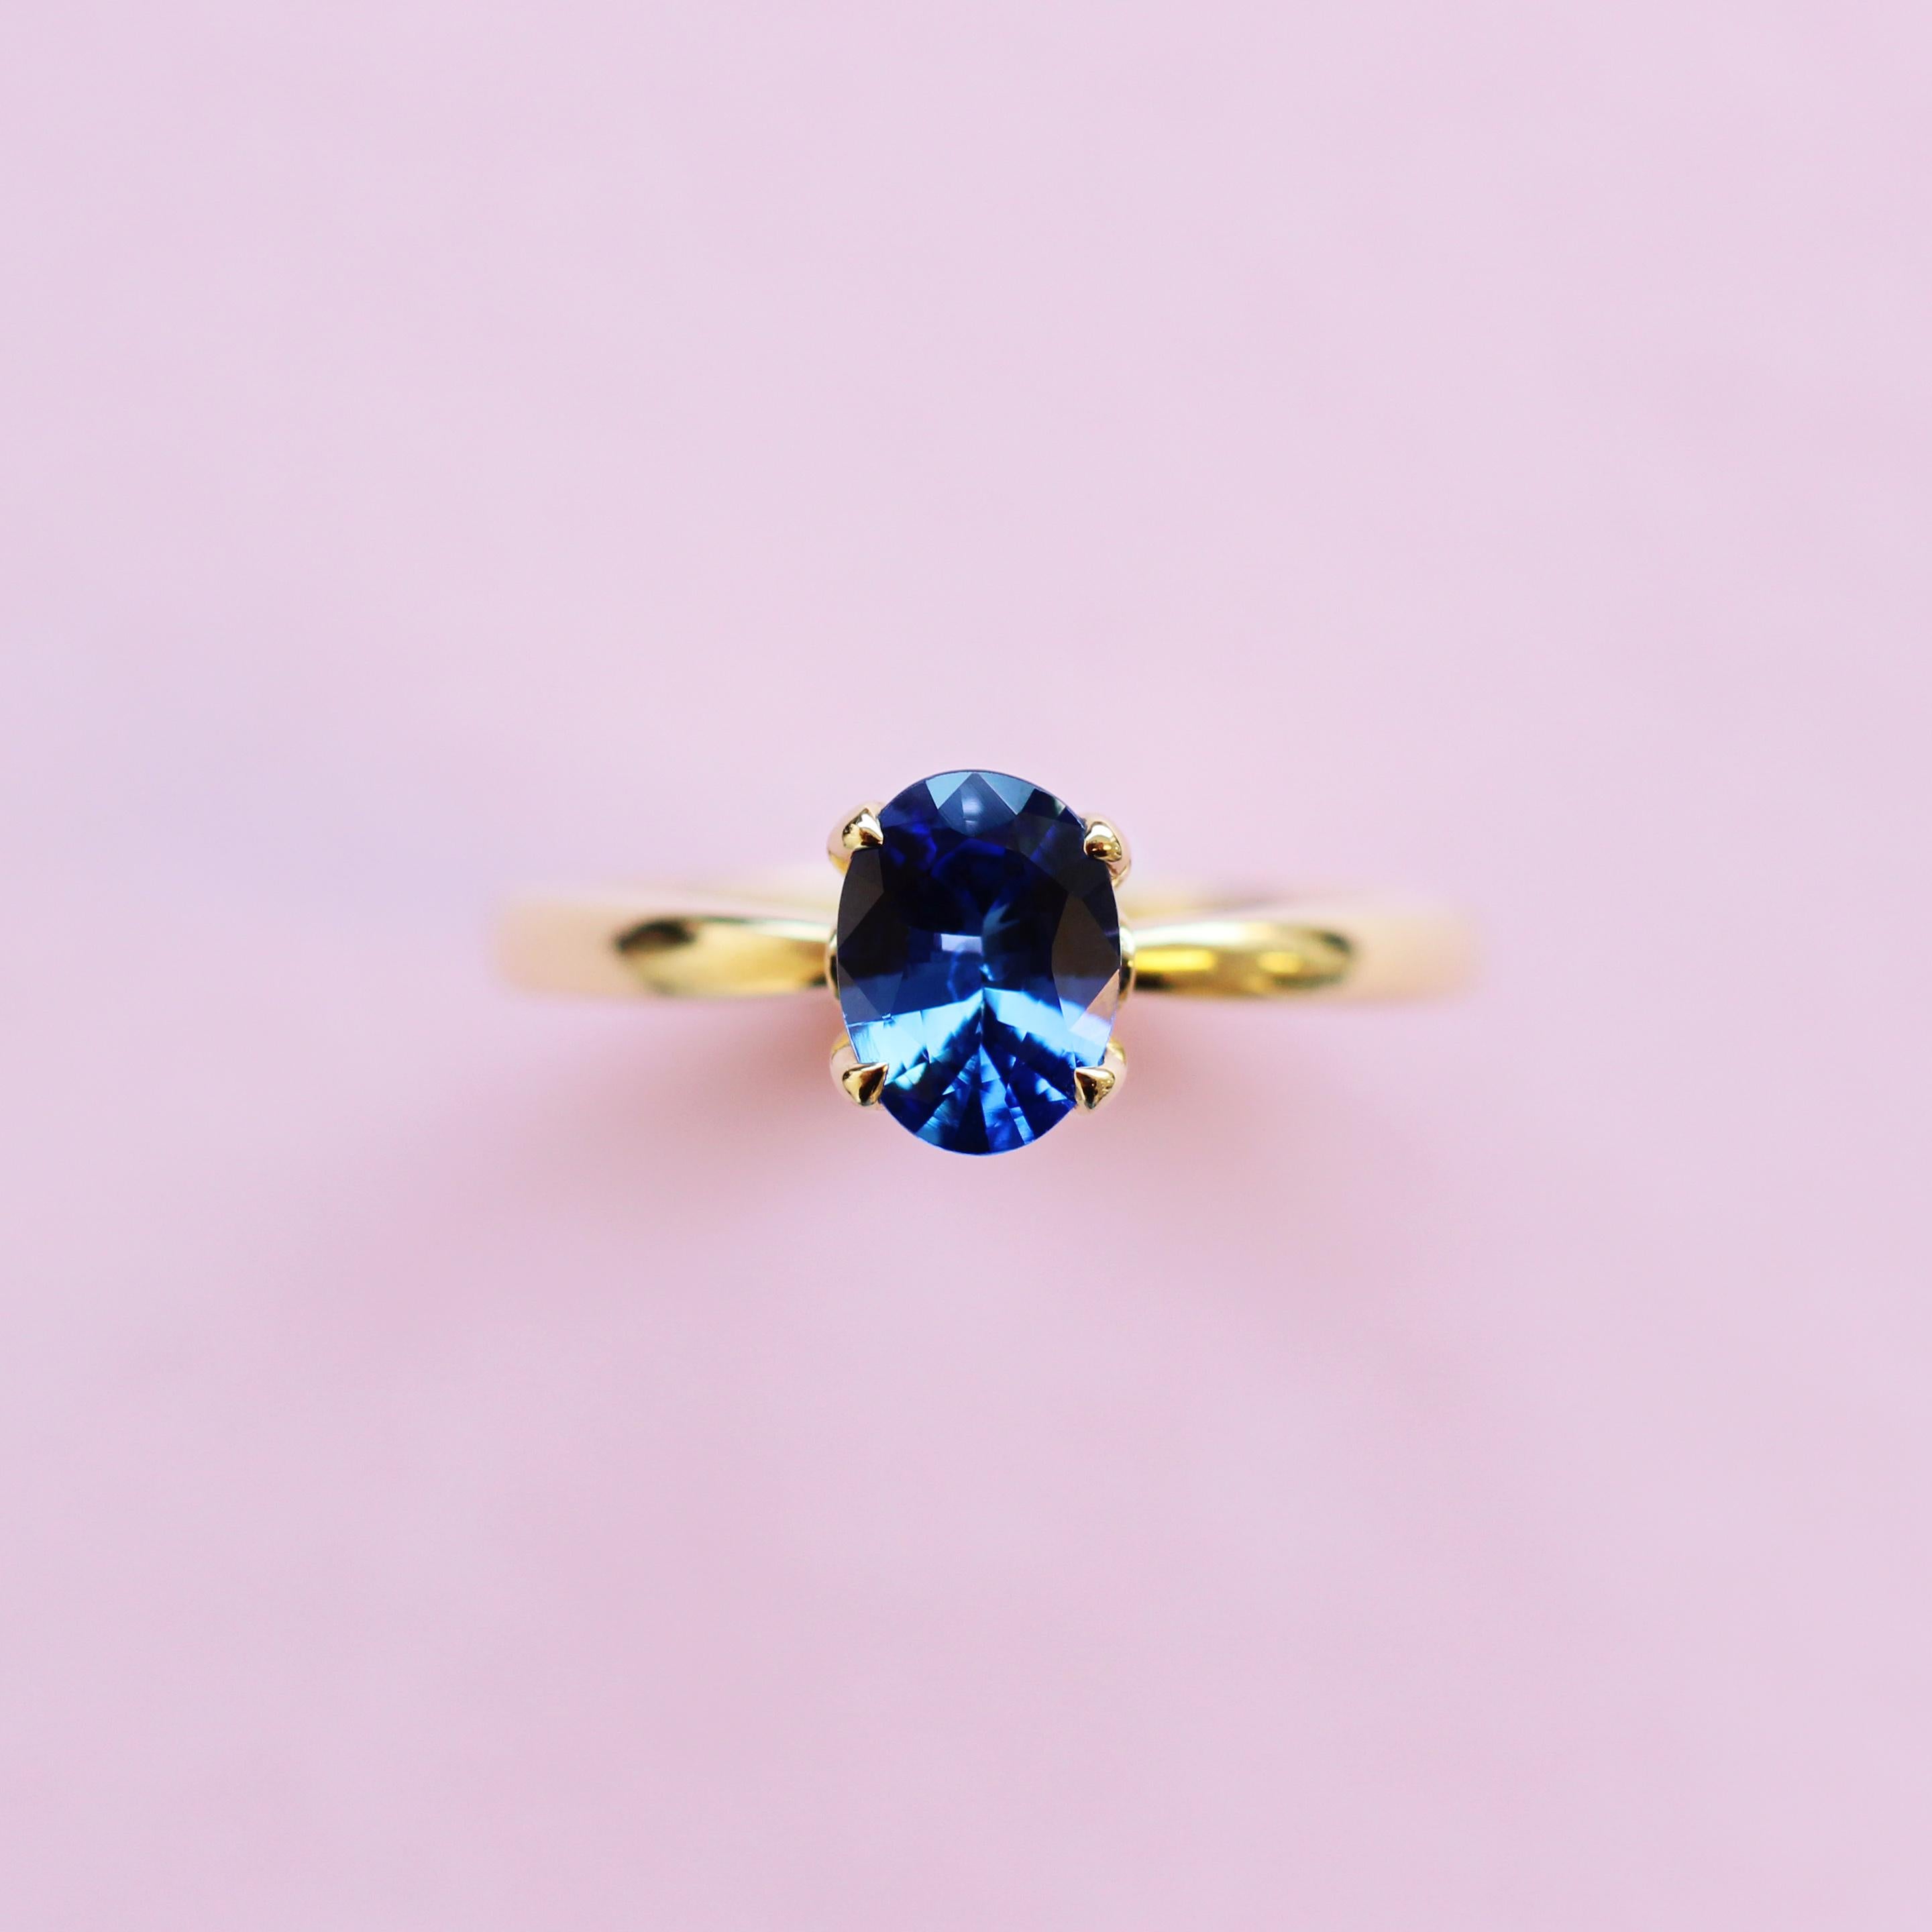 For Sale:  Blue Sapphire Solitaire Ring in 18 Karat Yellow Gold 4